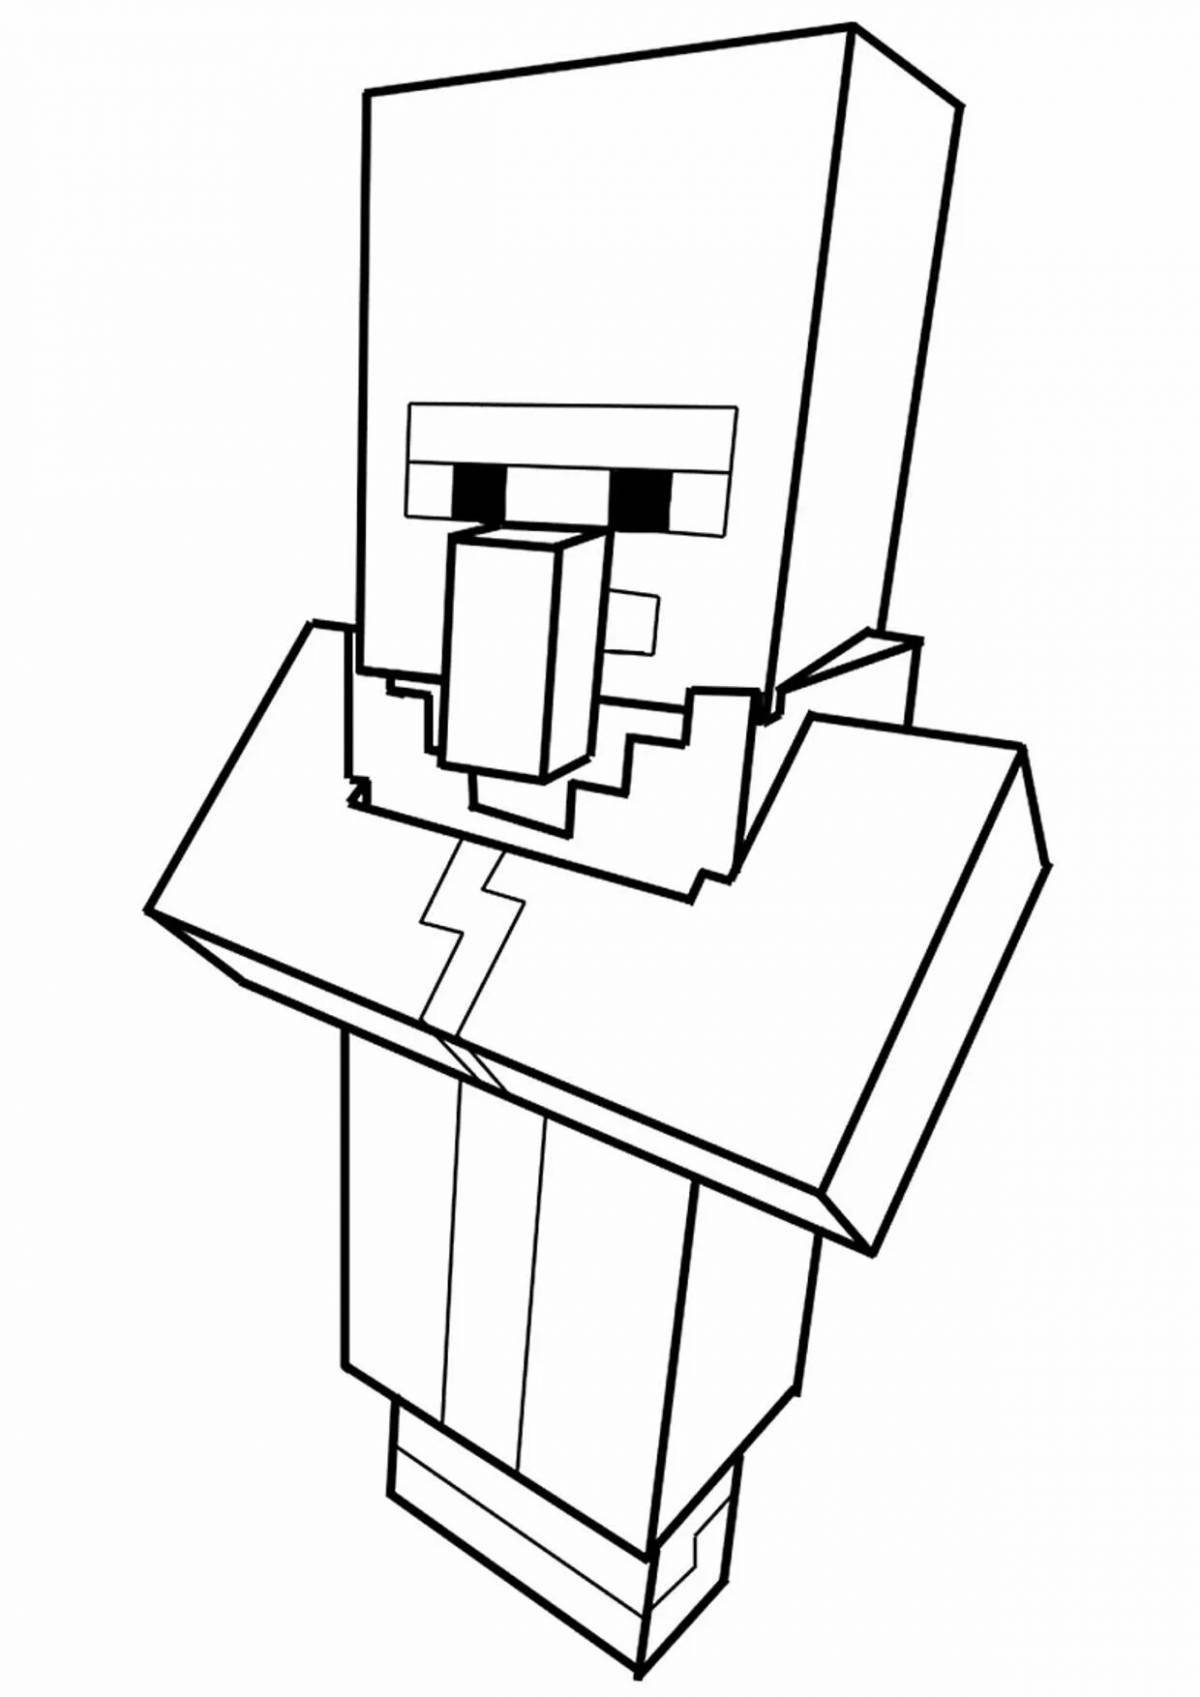 Colored Fancy Minecraft Villager Coloring Page